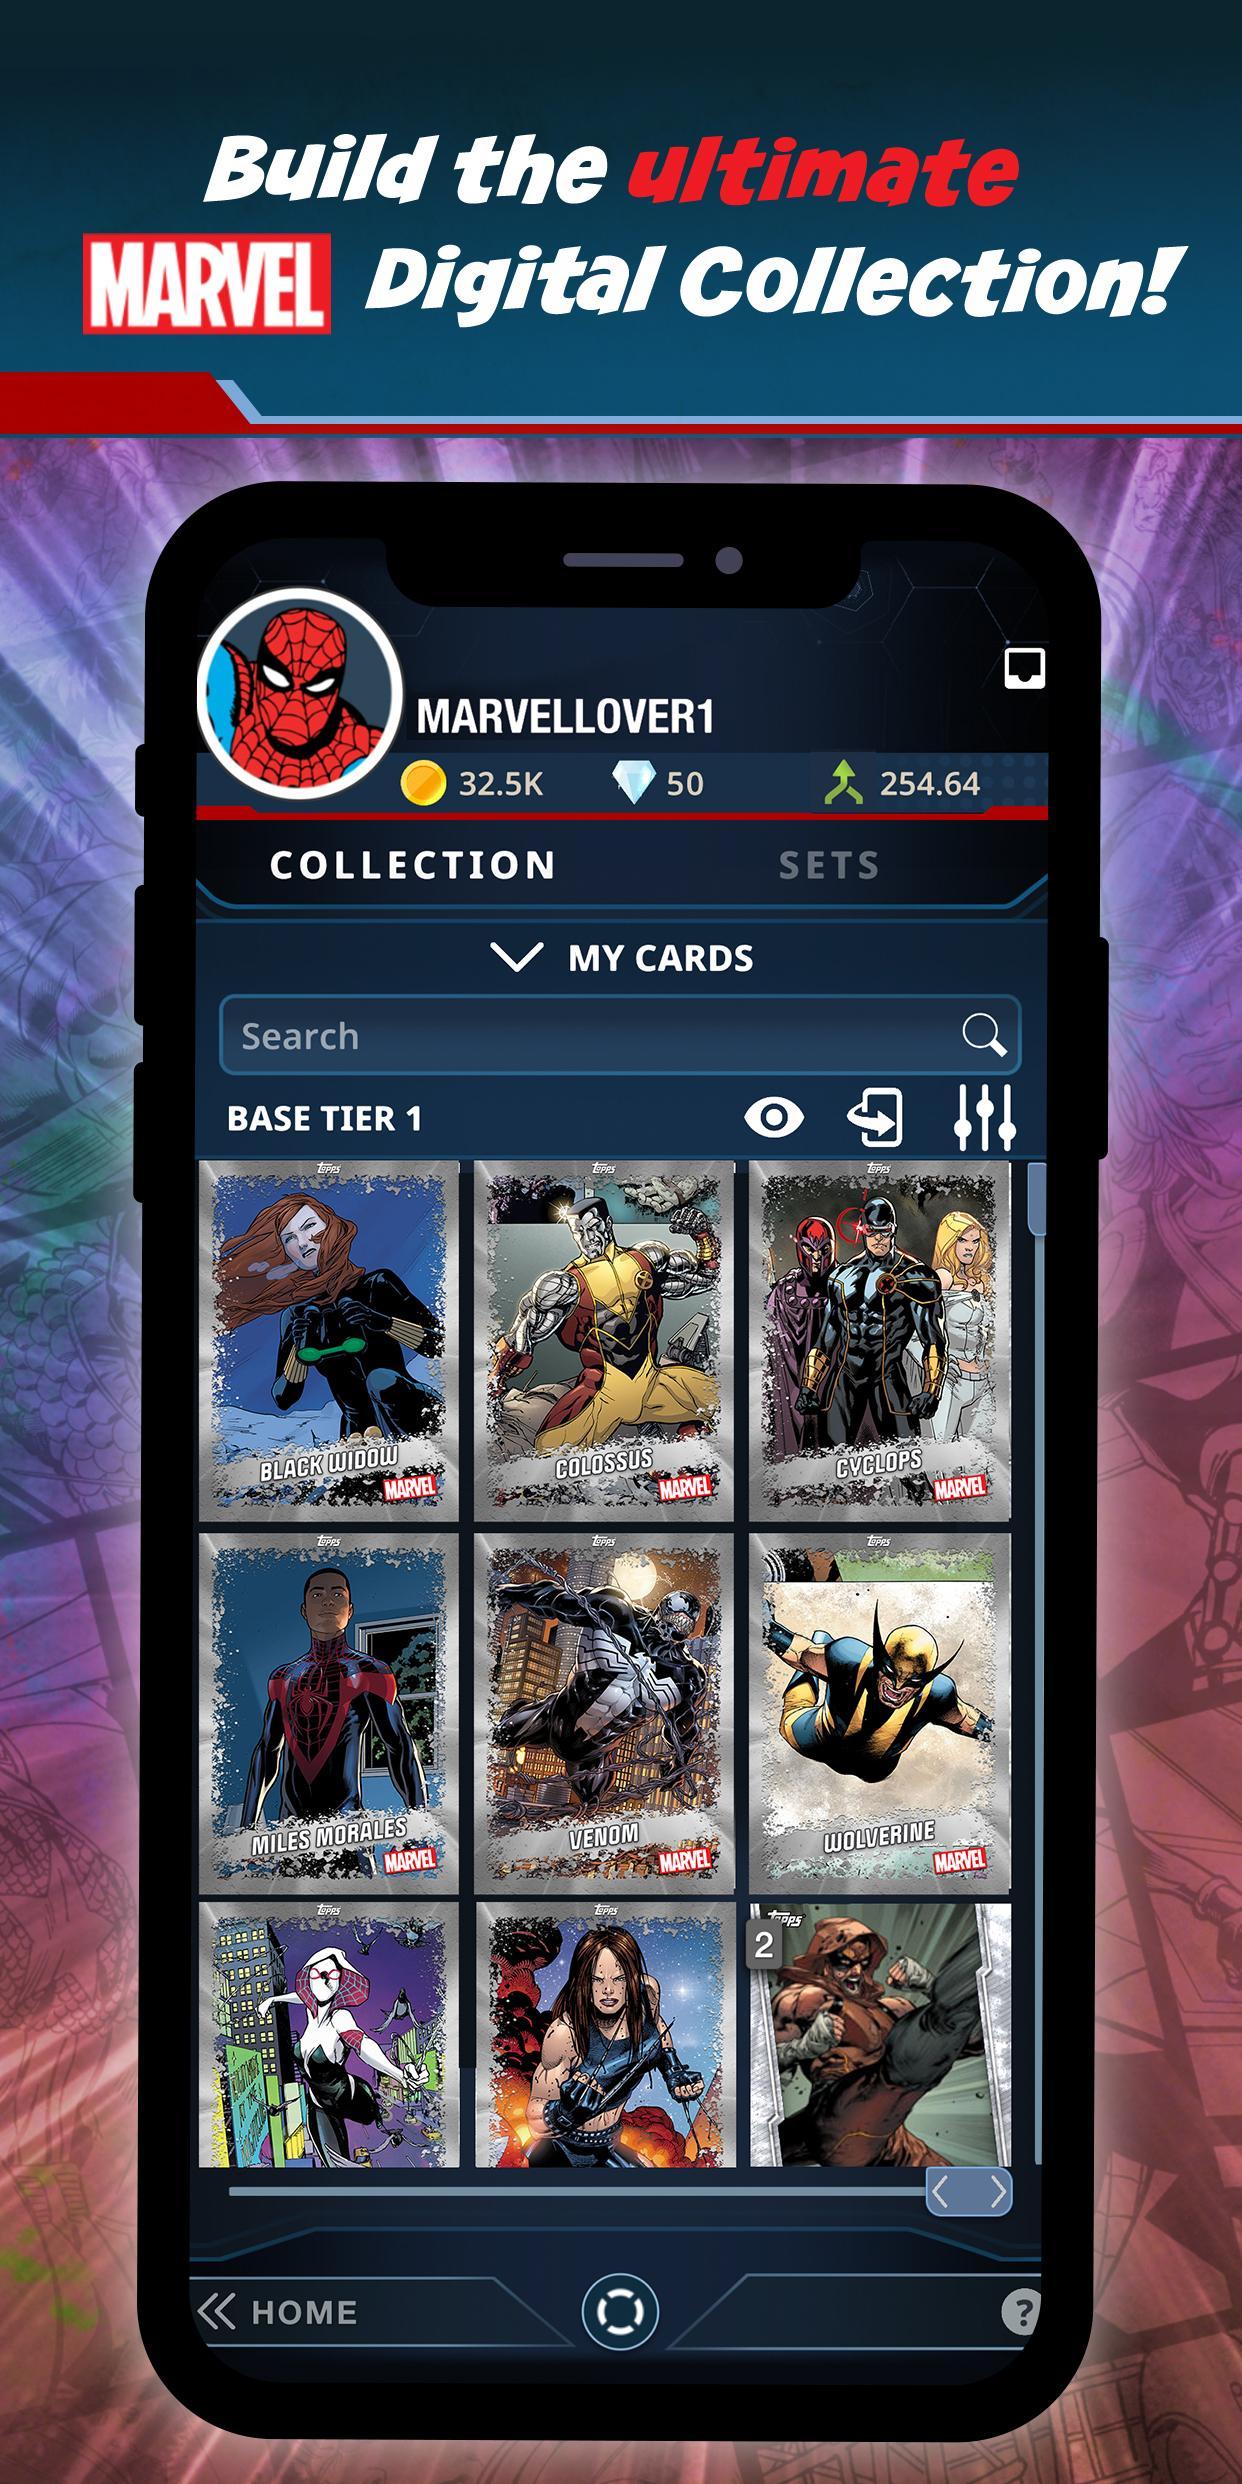 Marvel Collect! by Topps Card Trader 14.0.0 Screenshot 1